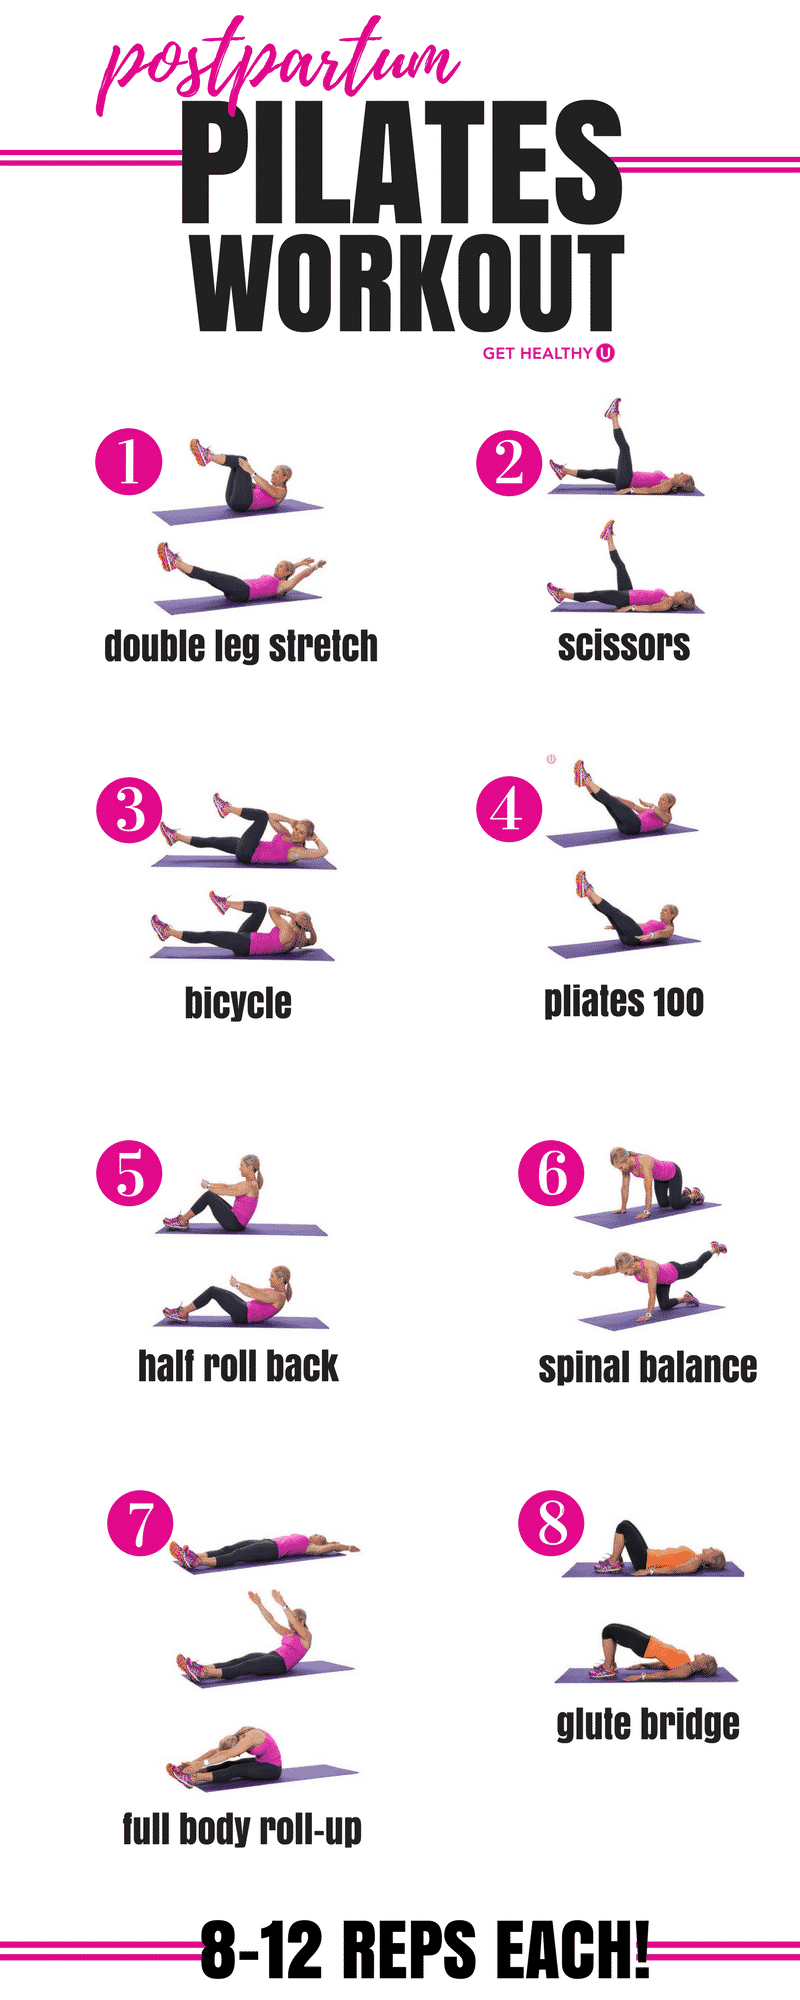 This is a postpartum pilates workout to help you tone your muscles and burn that baby fat!